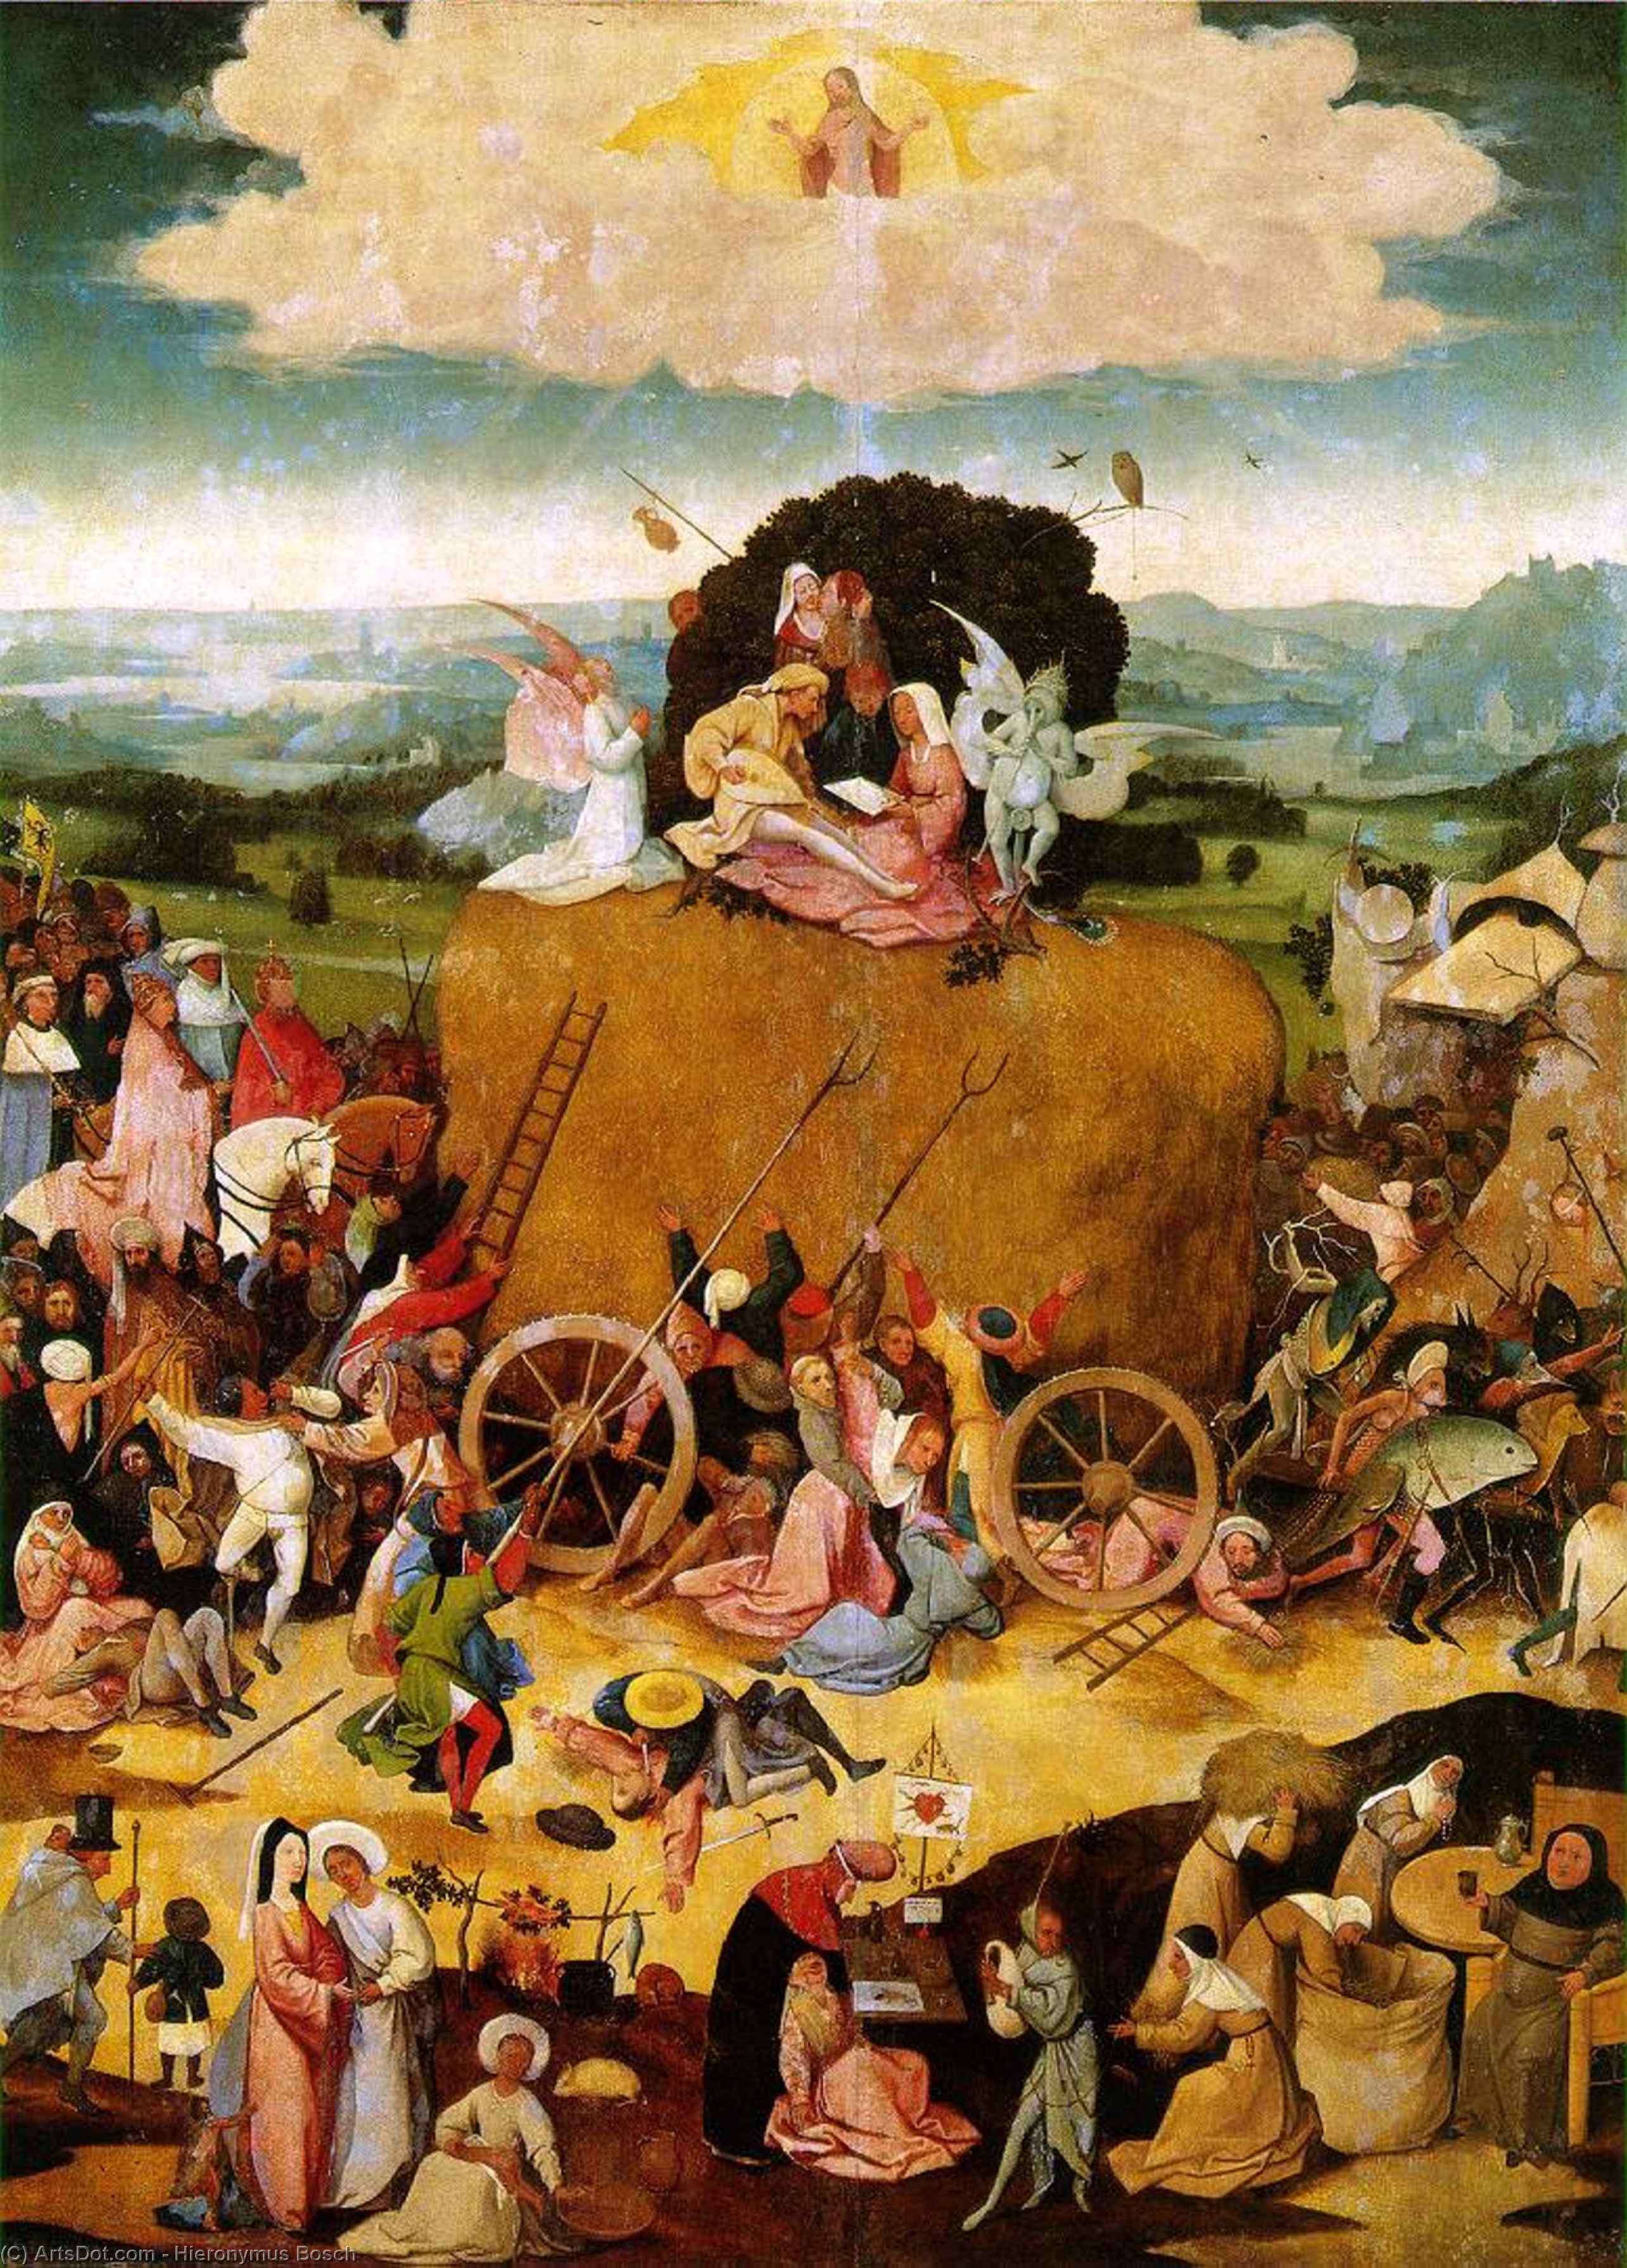 WikiOO.org - Encyclopedia of Fine Arts - Lukisan, Artwork Hieronymus Bosch - Triptych of Haywain (central panel)